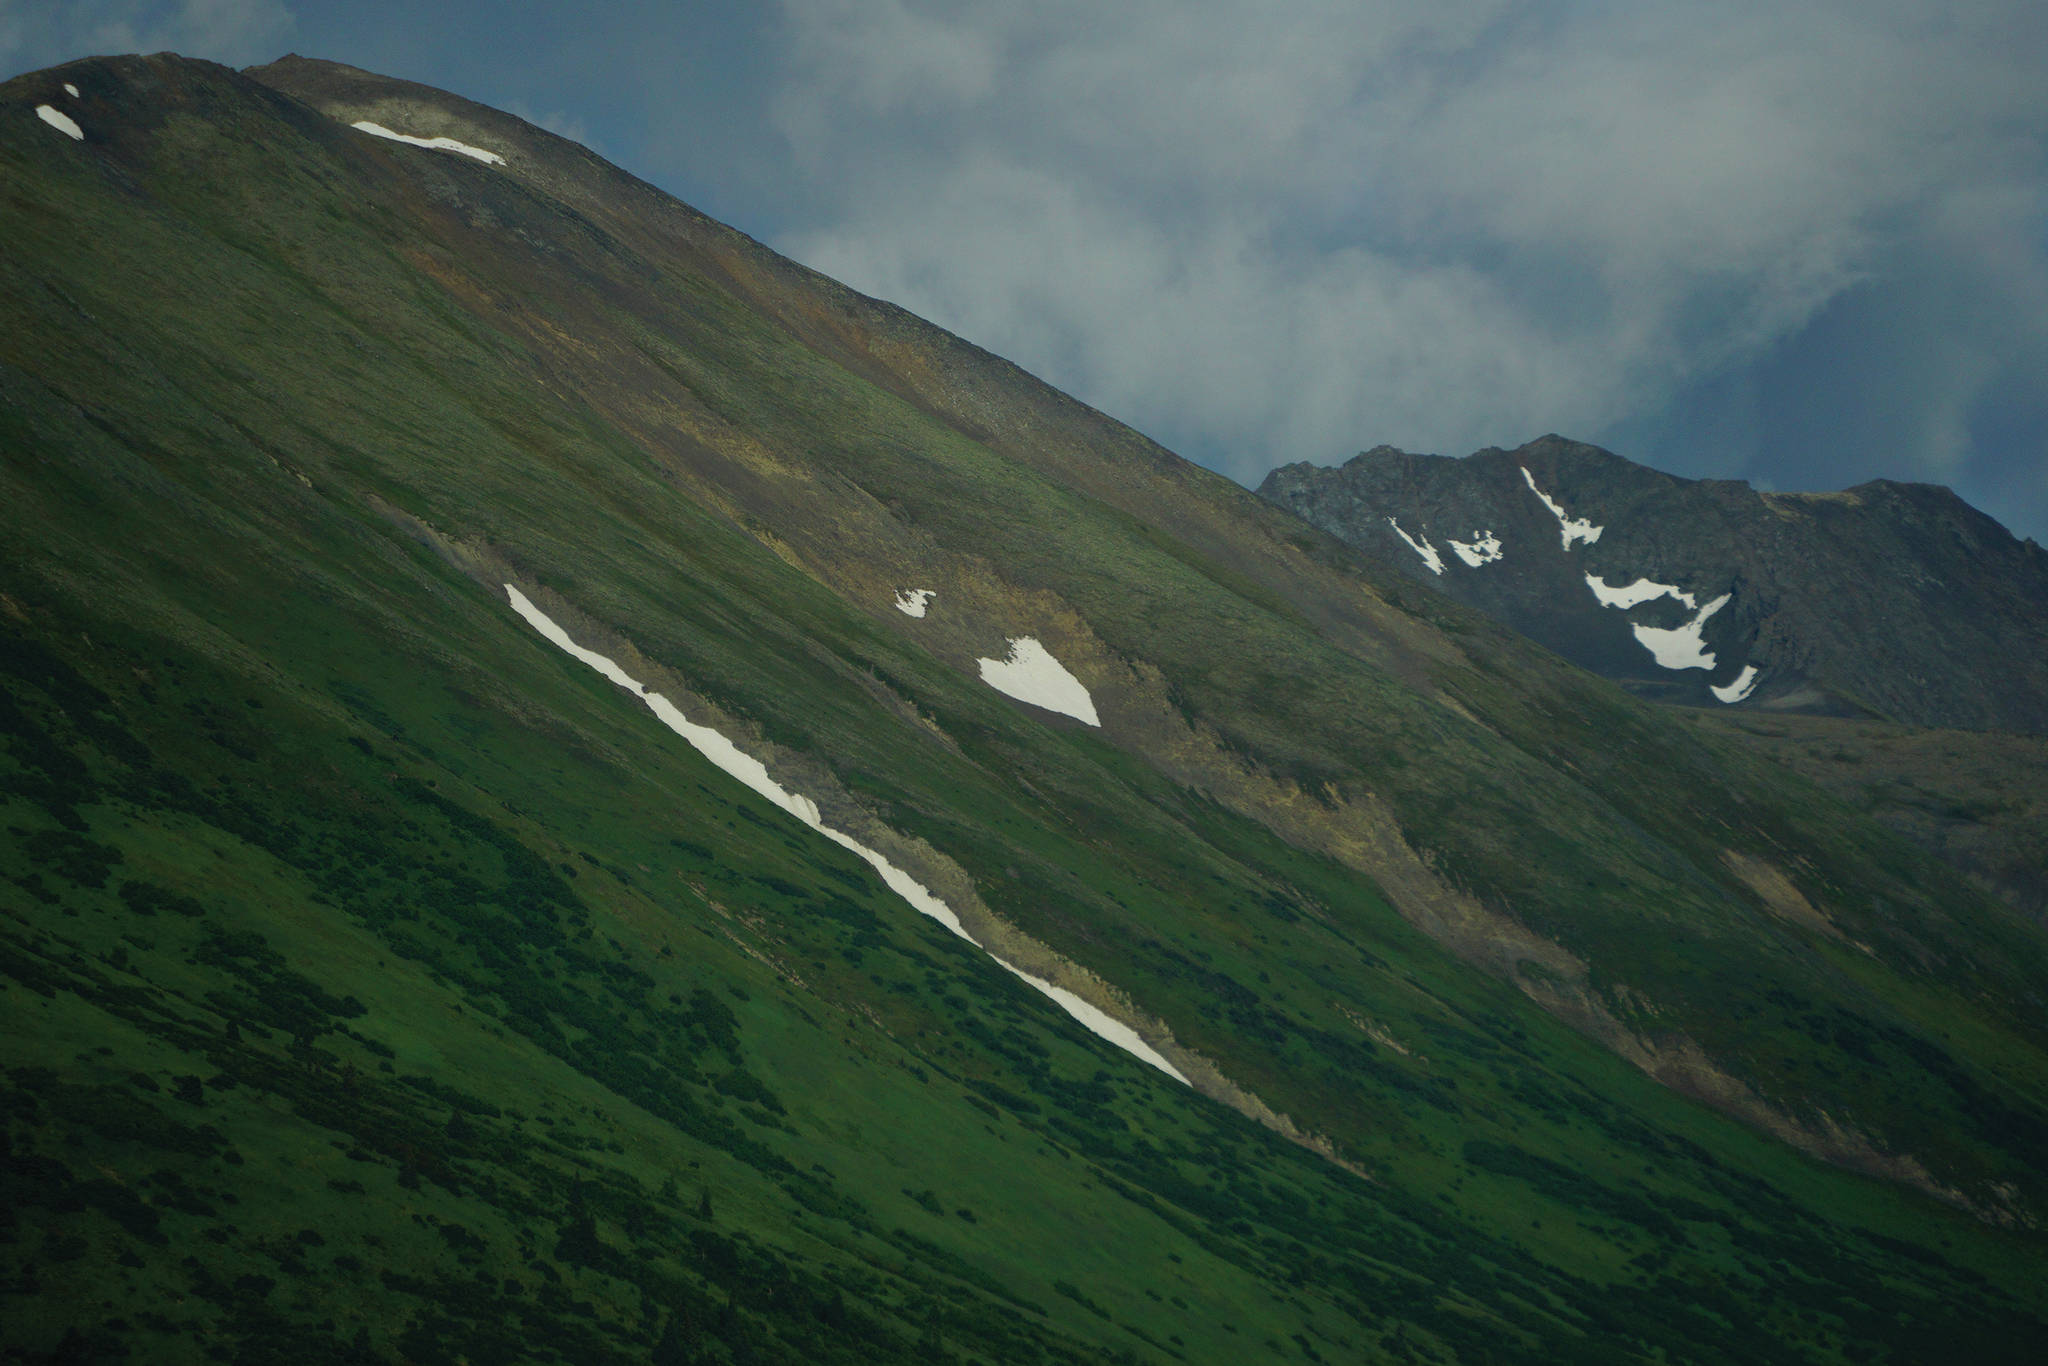 A patch of heart-shaped snow clings to the side of the Kenai Mountains on Tuesday, July 21, 2020, near Hope, Alaska. (Photo by Michael Armstrong/Homer News)